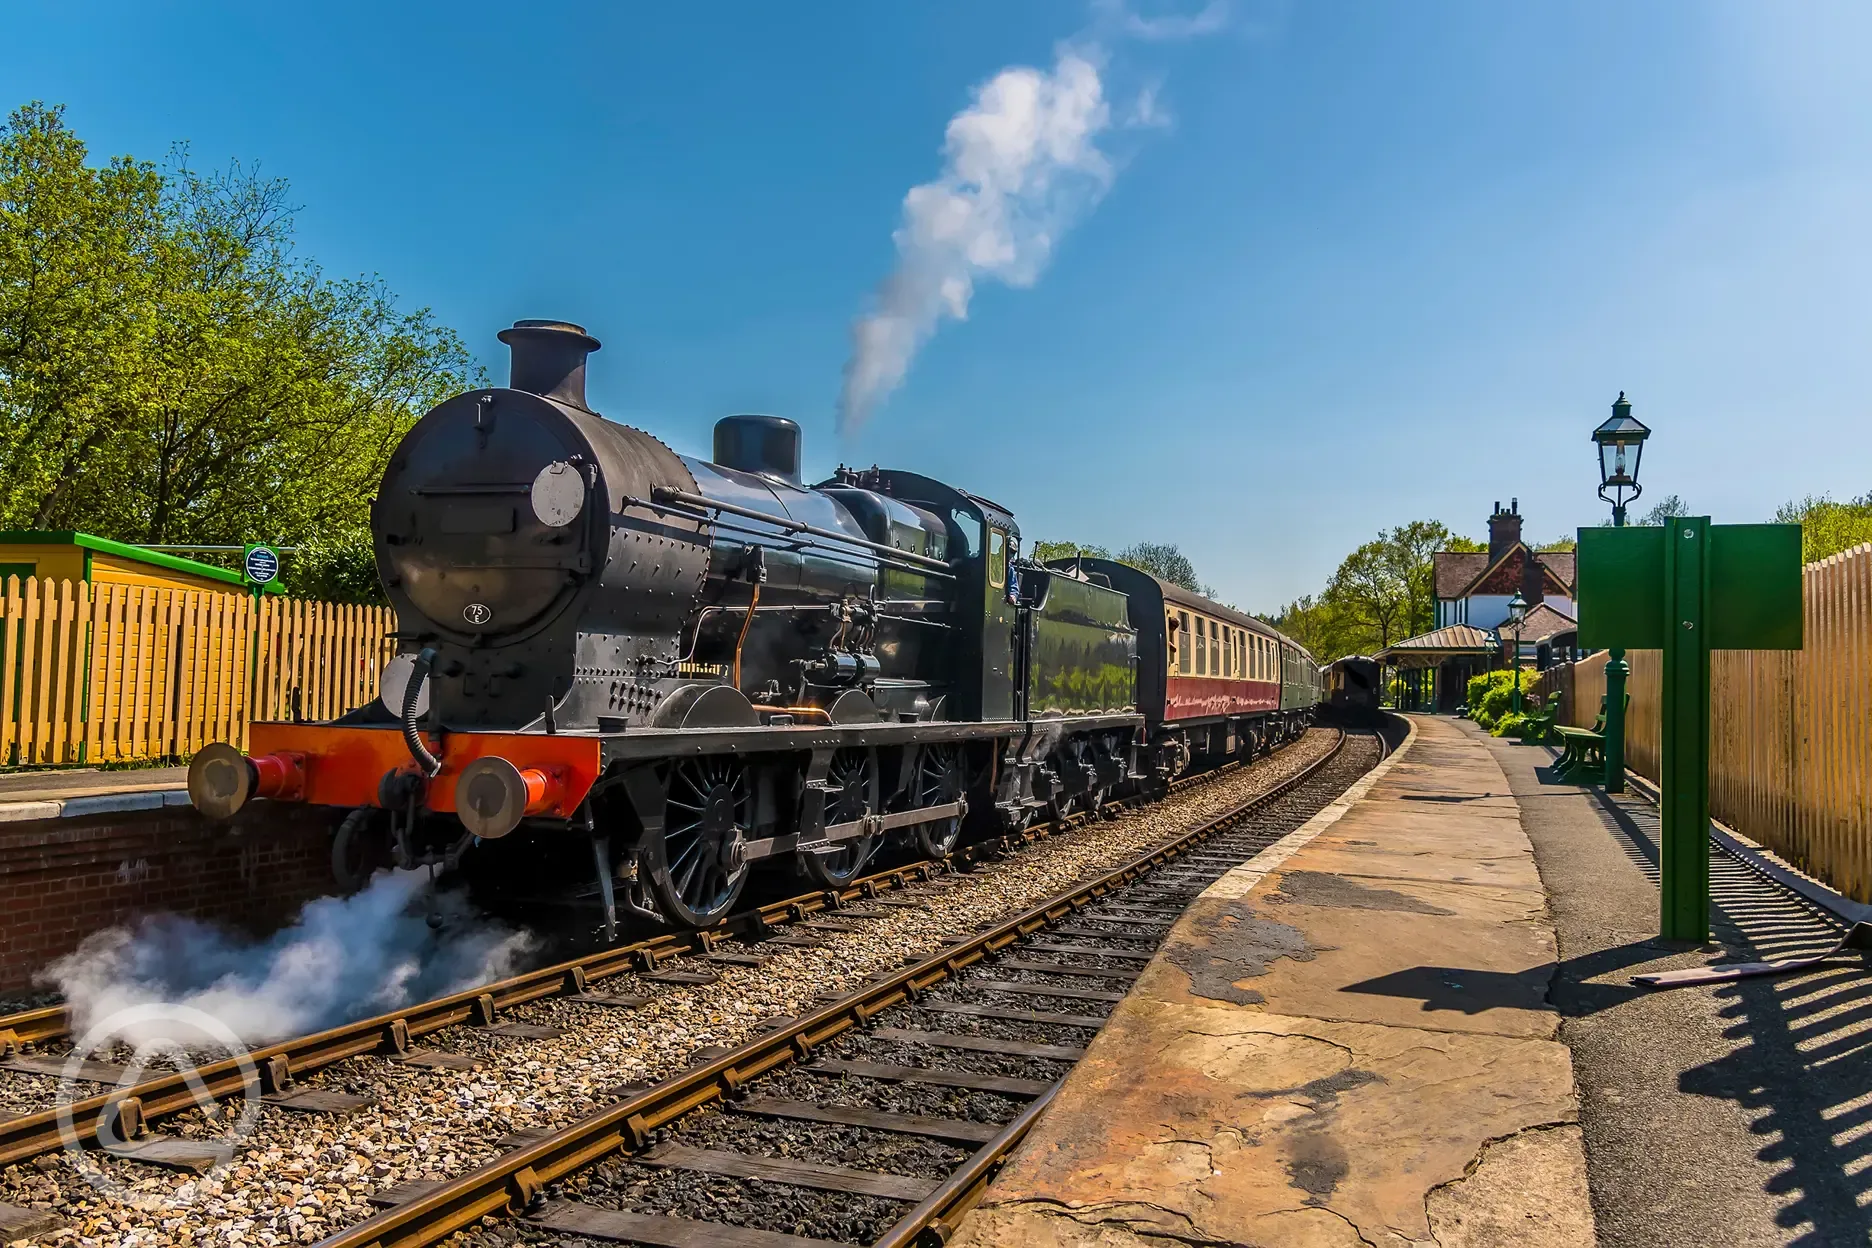 Nearby Bluebell Railway